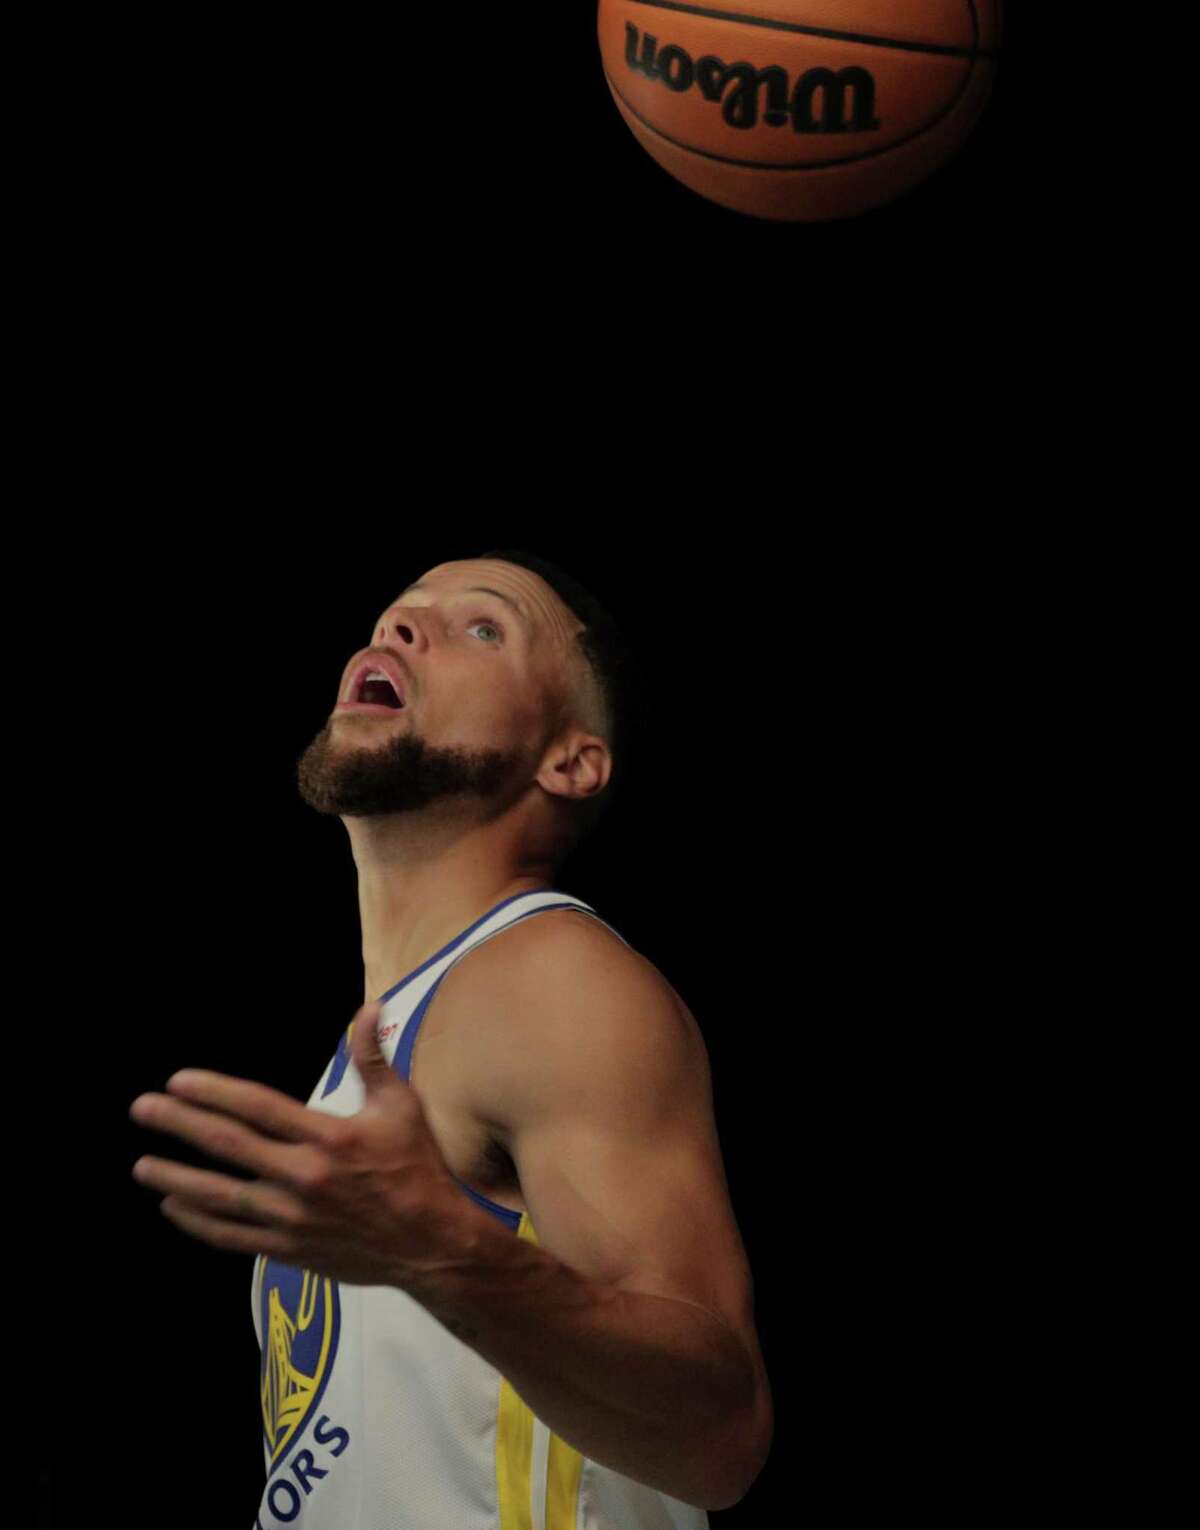 Stephen Curry has his portrait made as the Golden State Warriors held their media day for the 2021-22 season at Chase Center in San Francisco, Calif., on Monday, September 27, 2021.